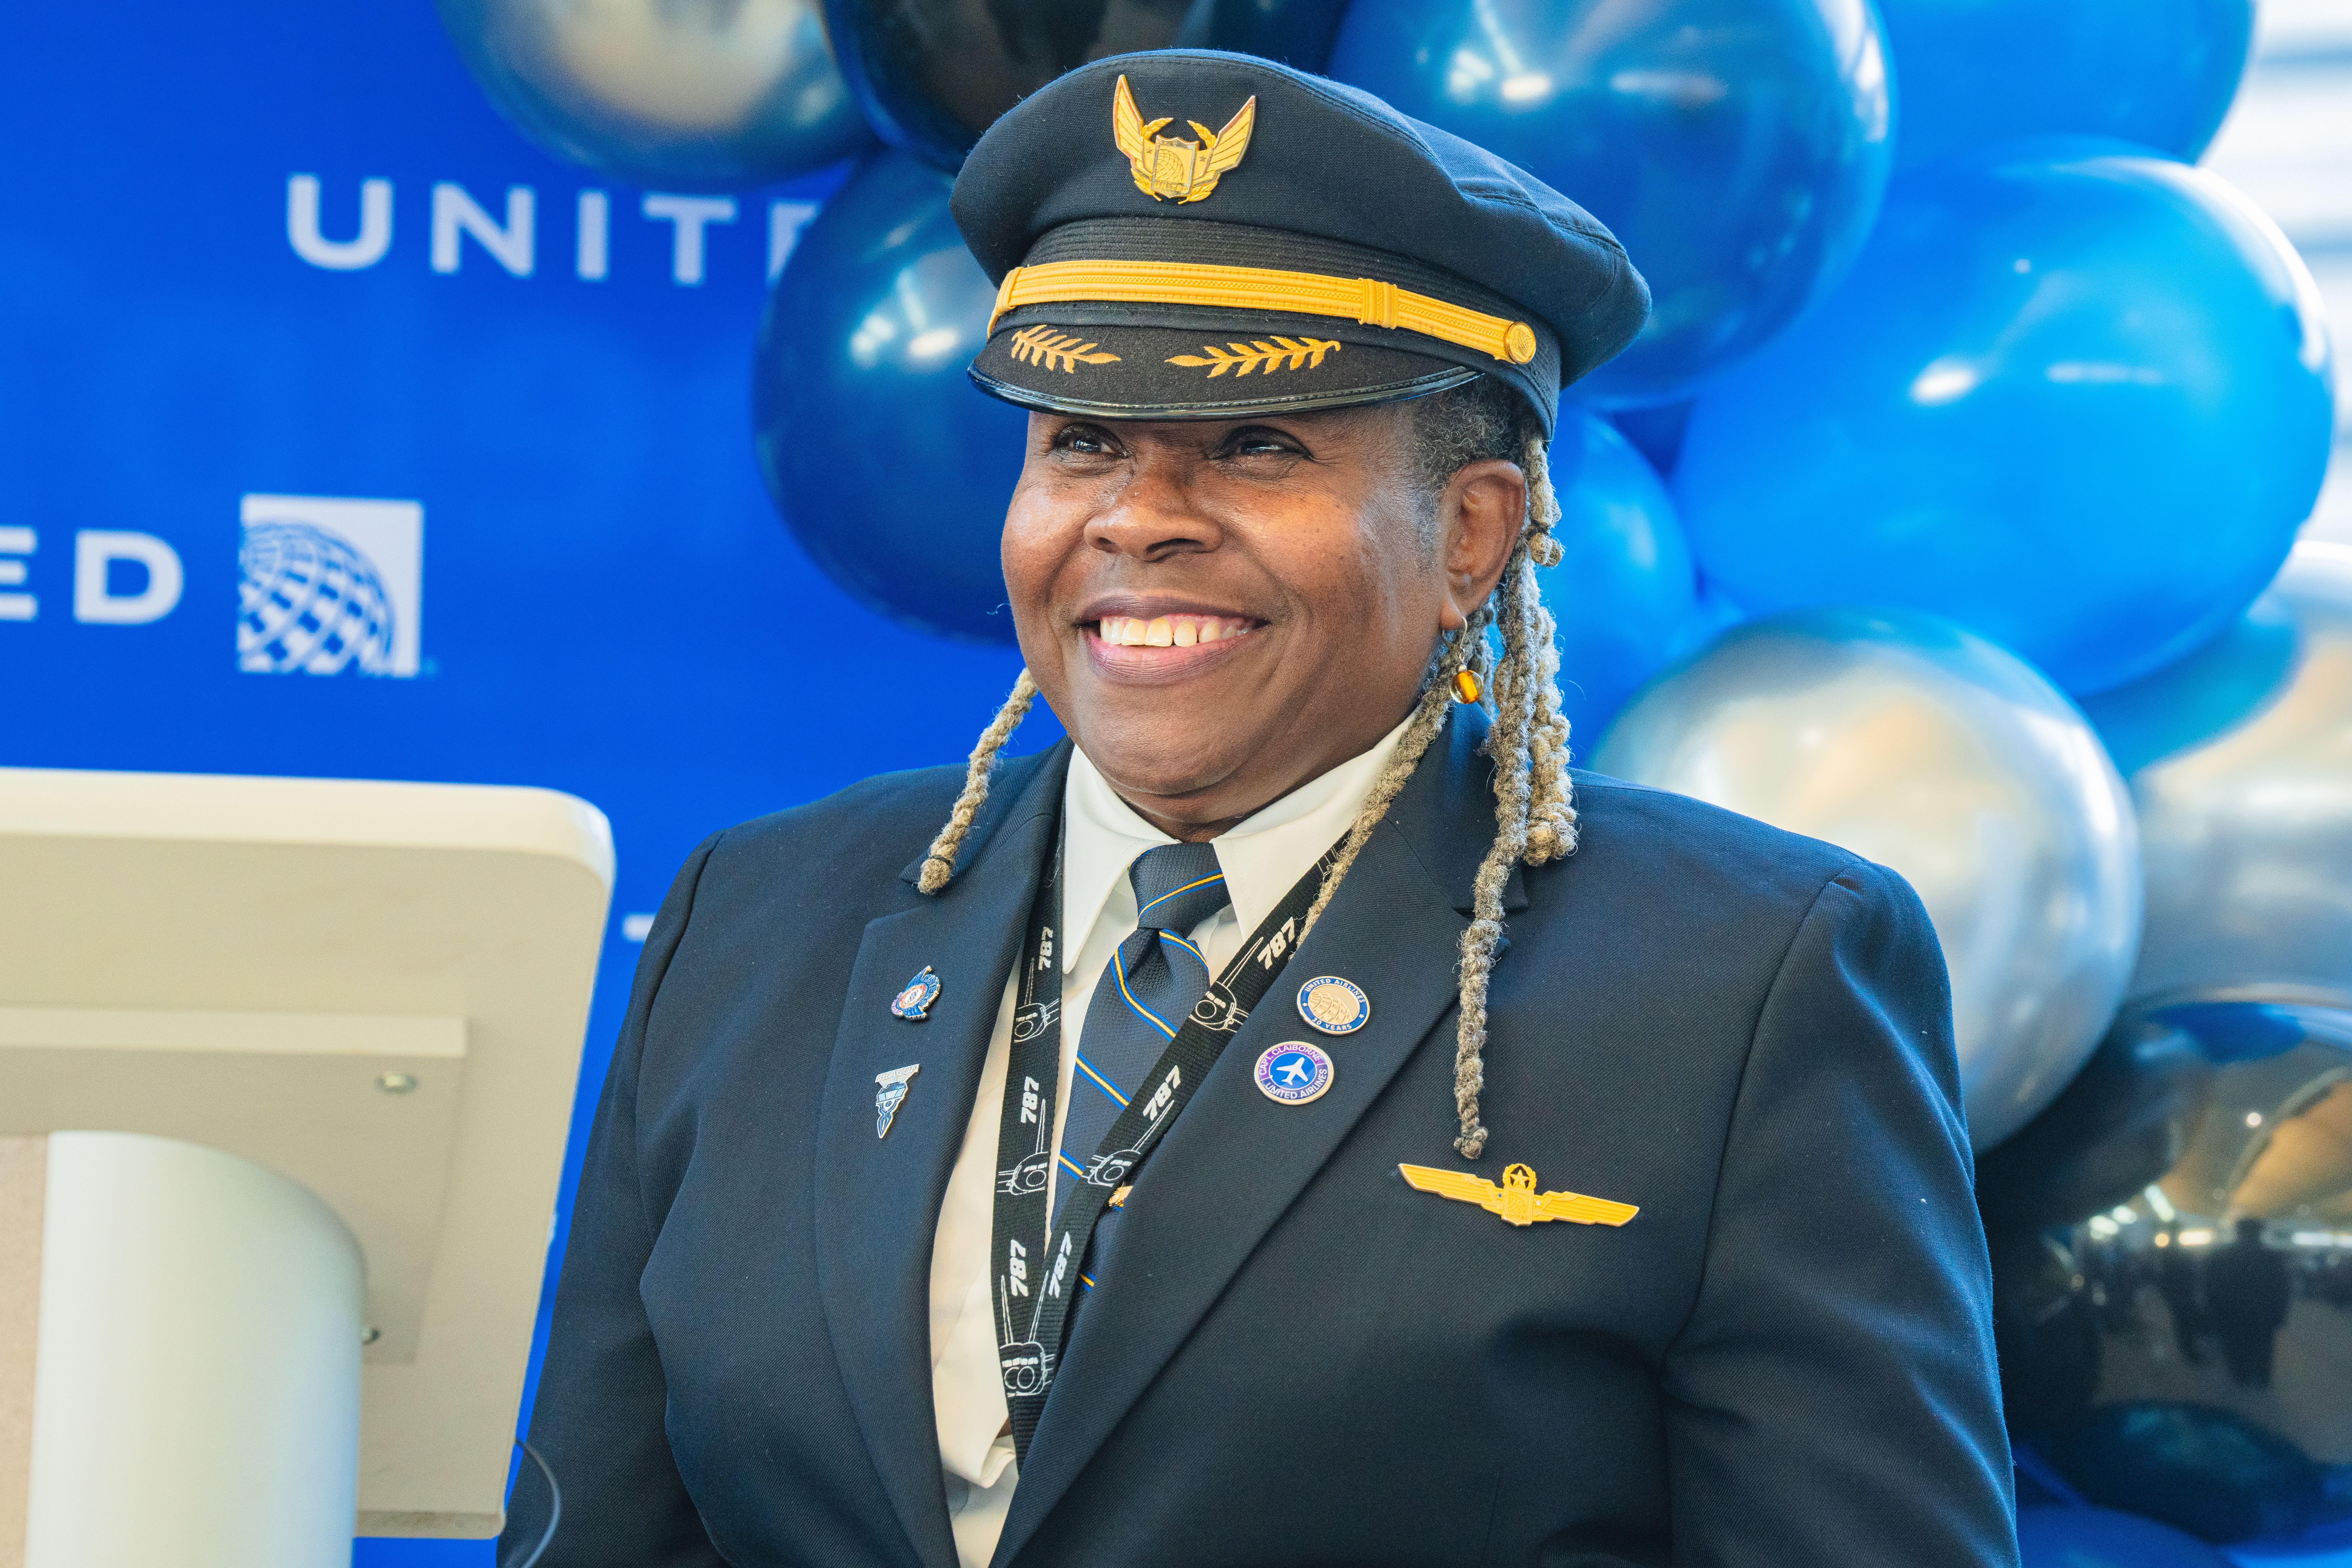 Captain Theresa Claiborne at the airport